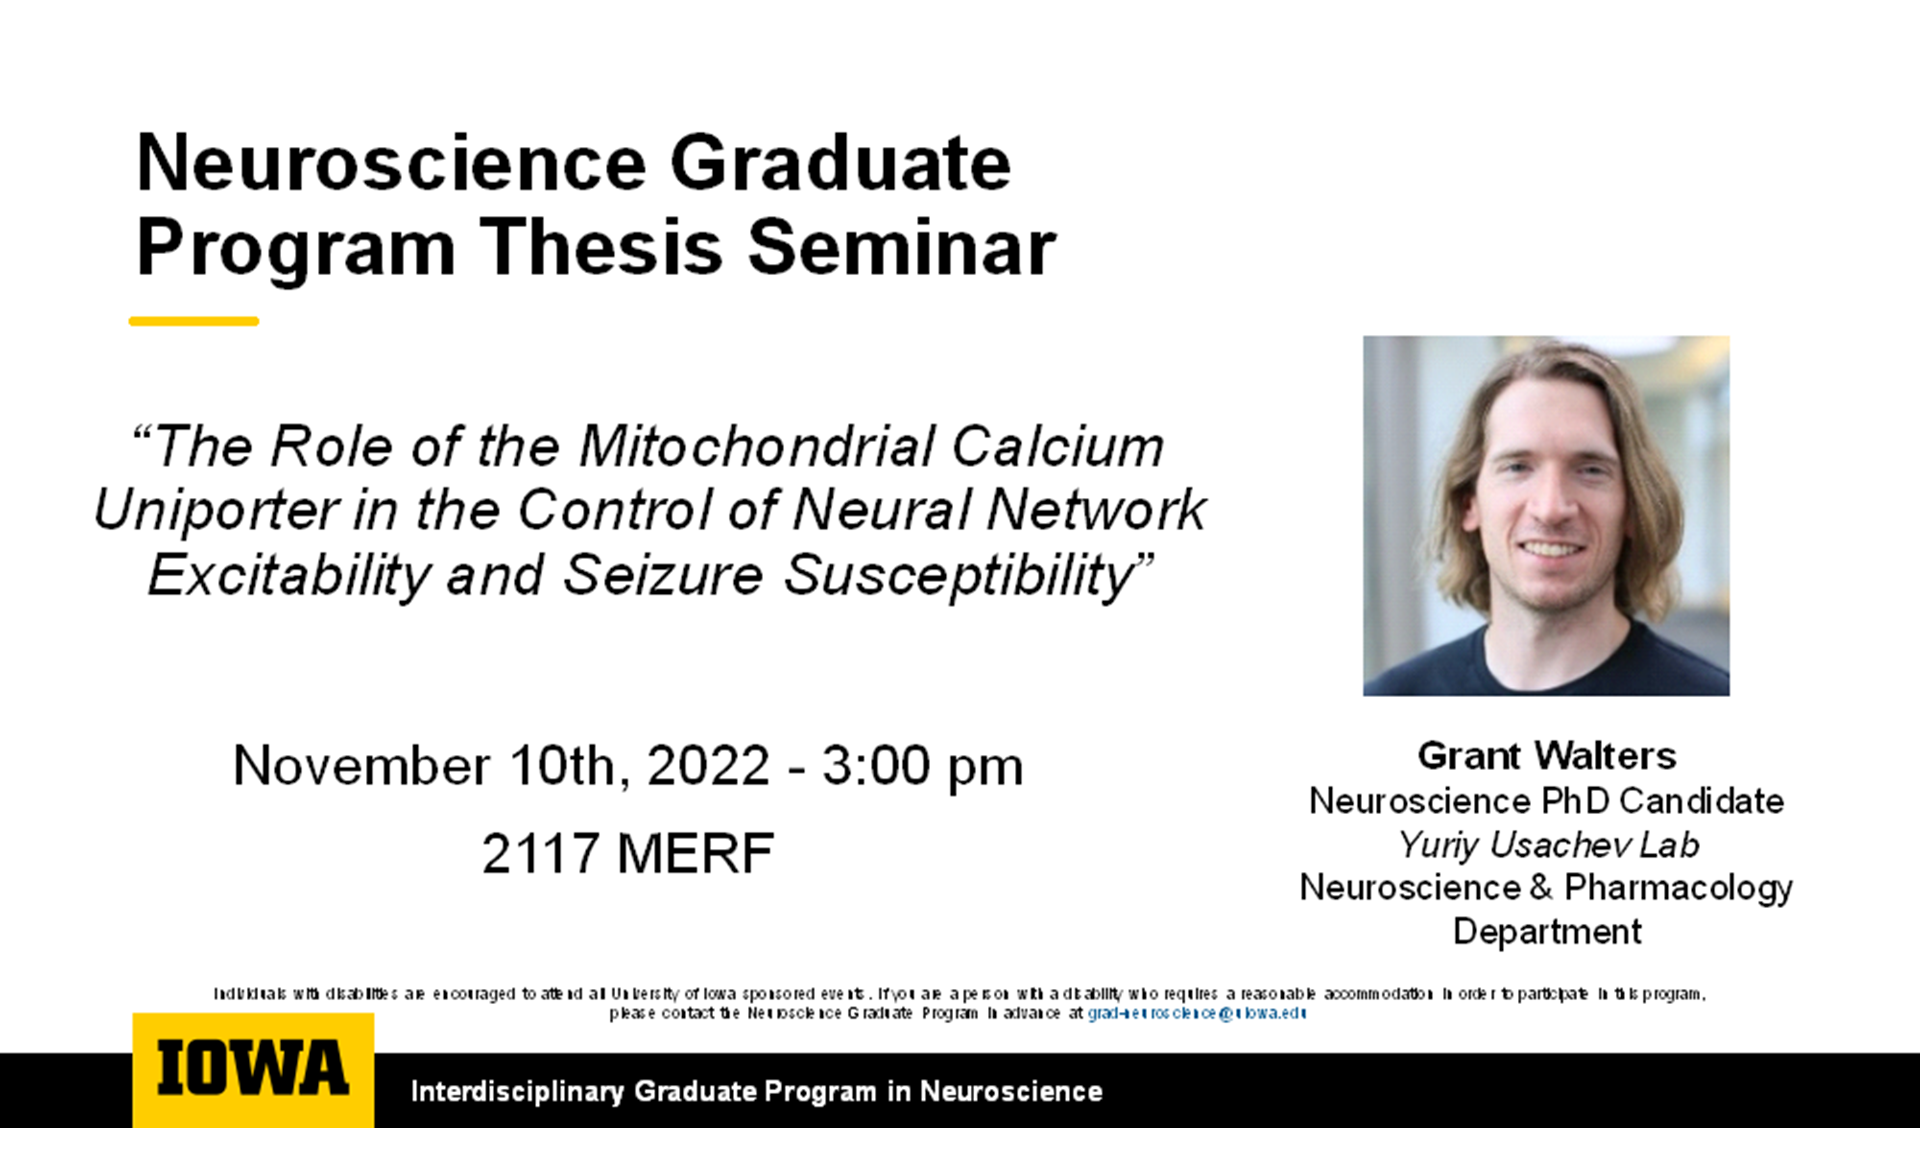 Grant Walters Neuroscience Thesis Semianr 11.10.22